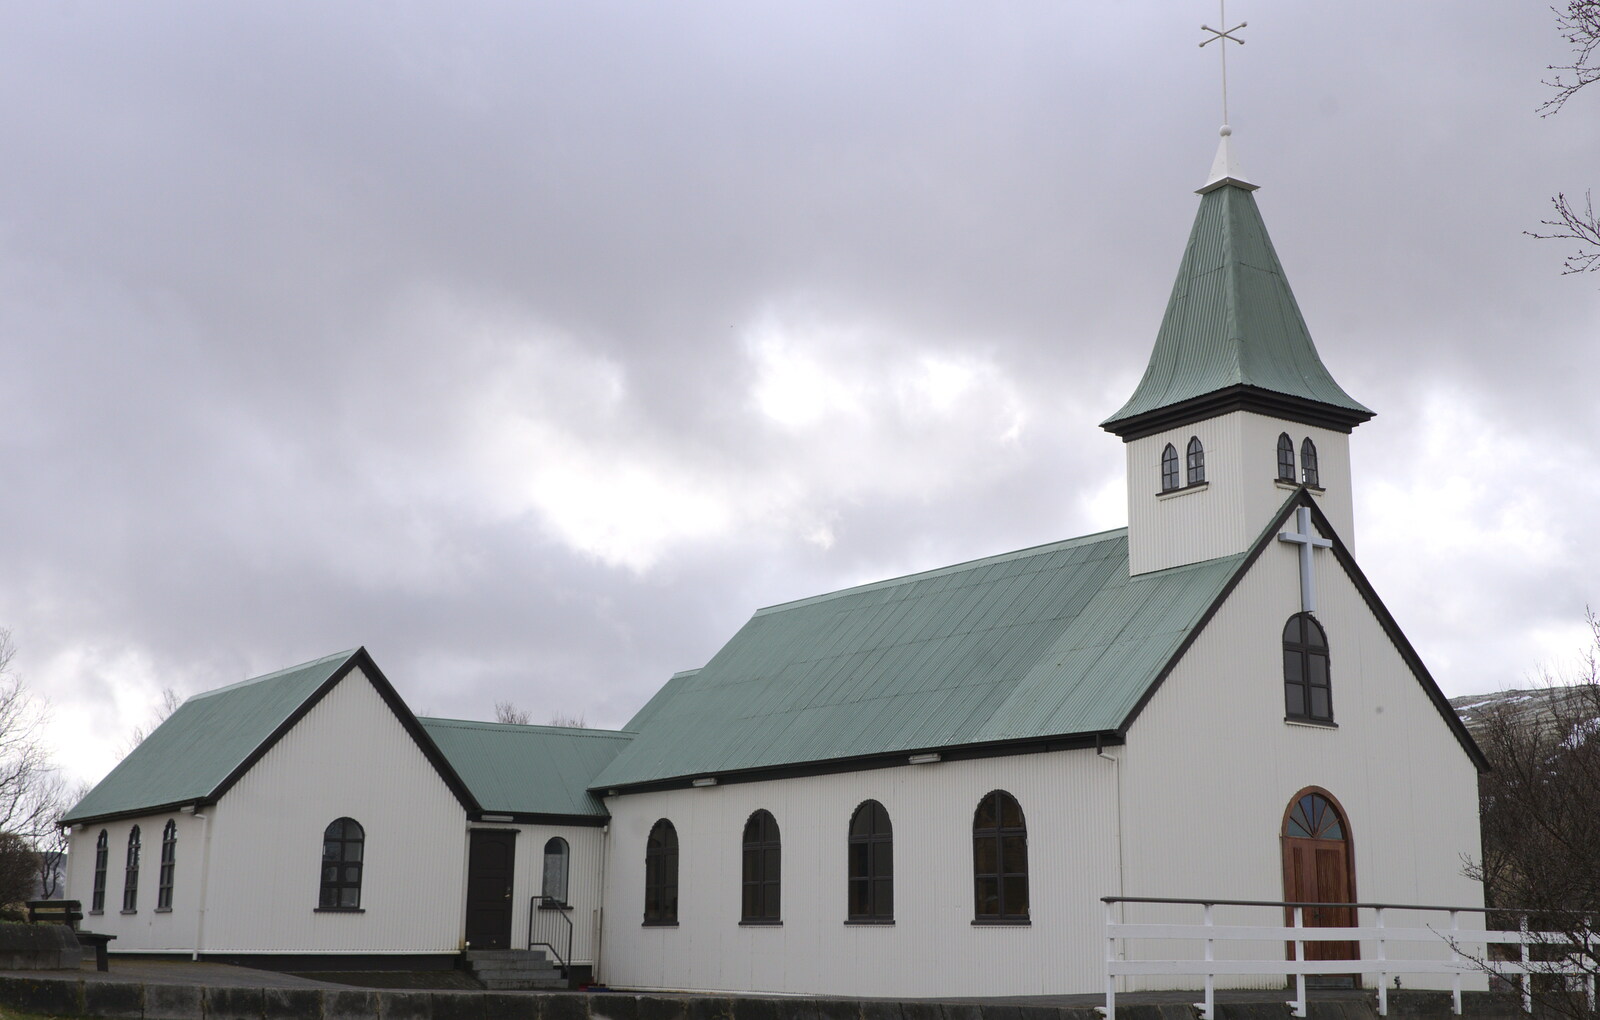 Our first stop is a church up in the foothills from The Golden Circle of Ísland, Iceland - 22nd April 2017